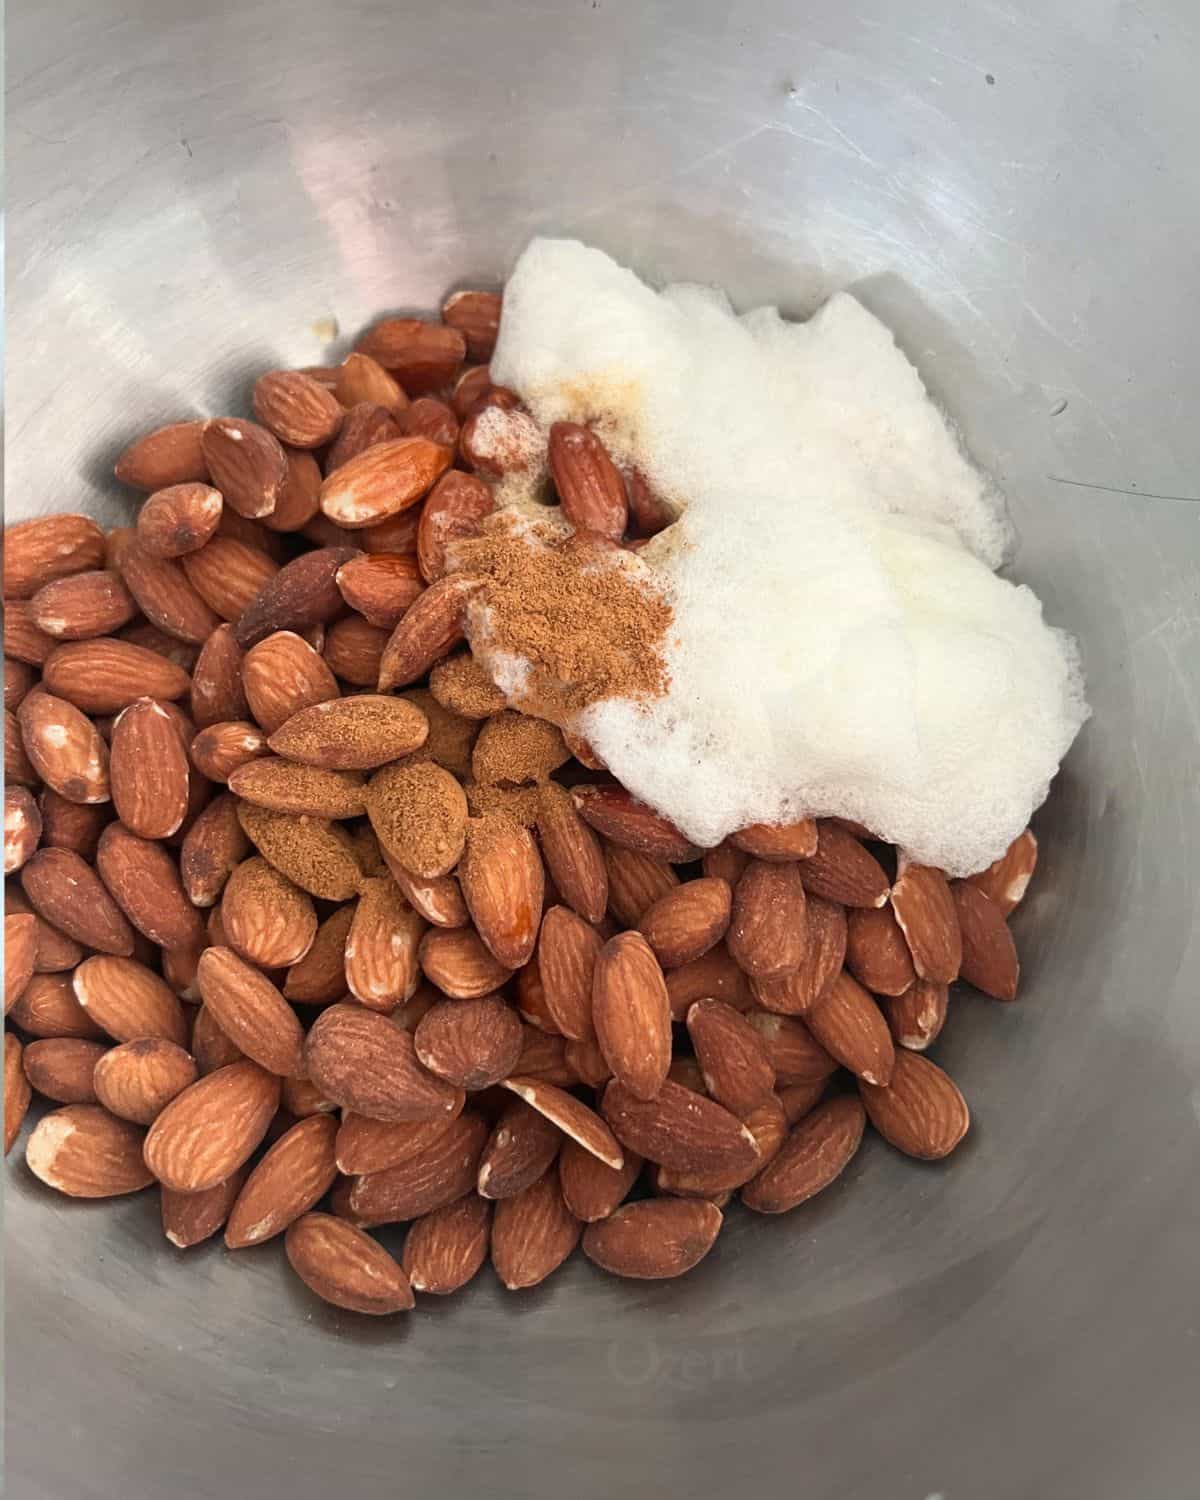 Egg whites, almonds, and seasonings mixed in a bowl. 